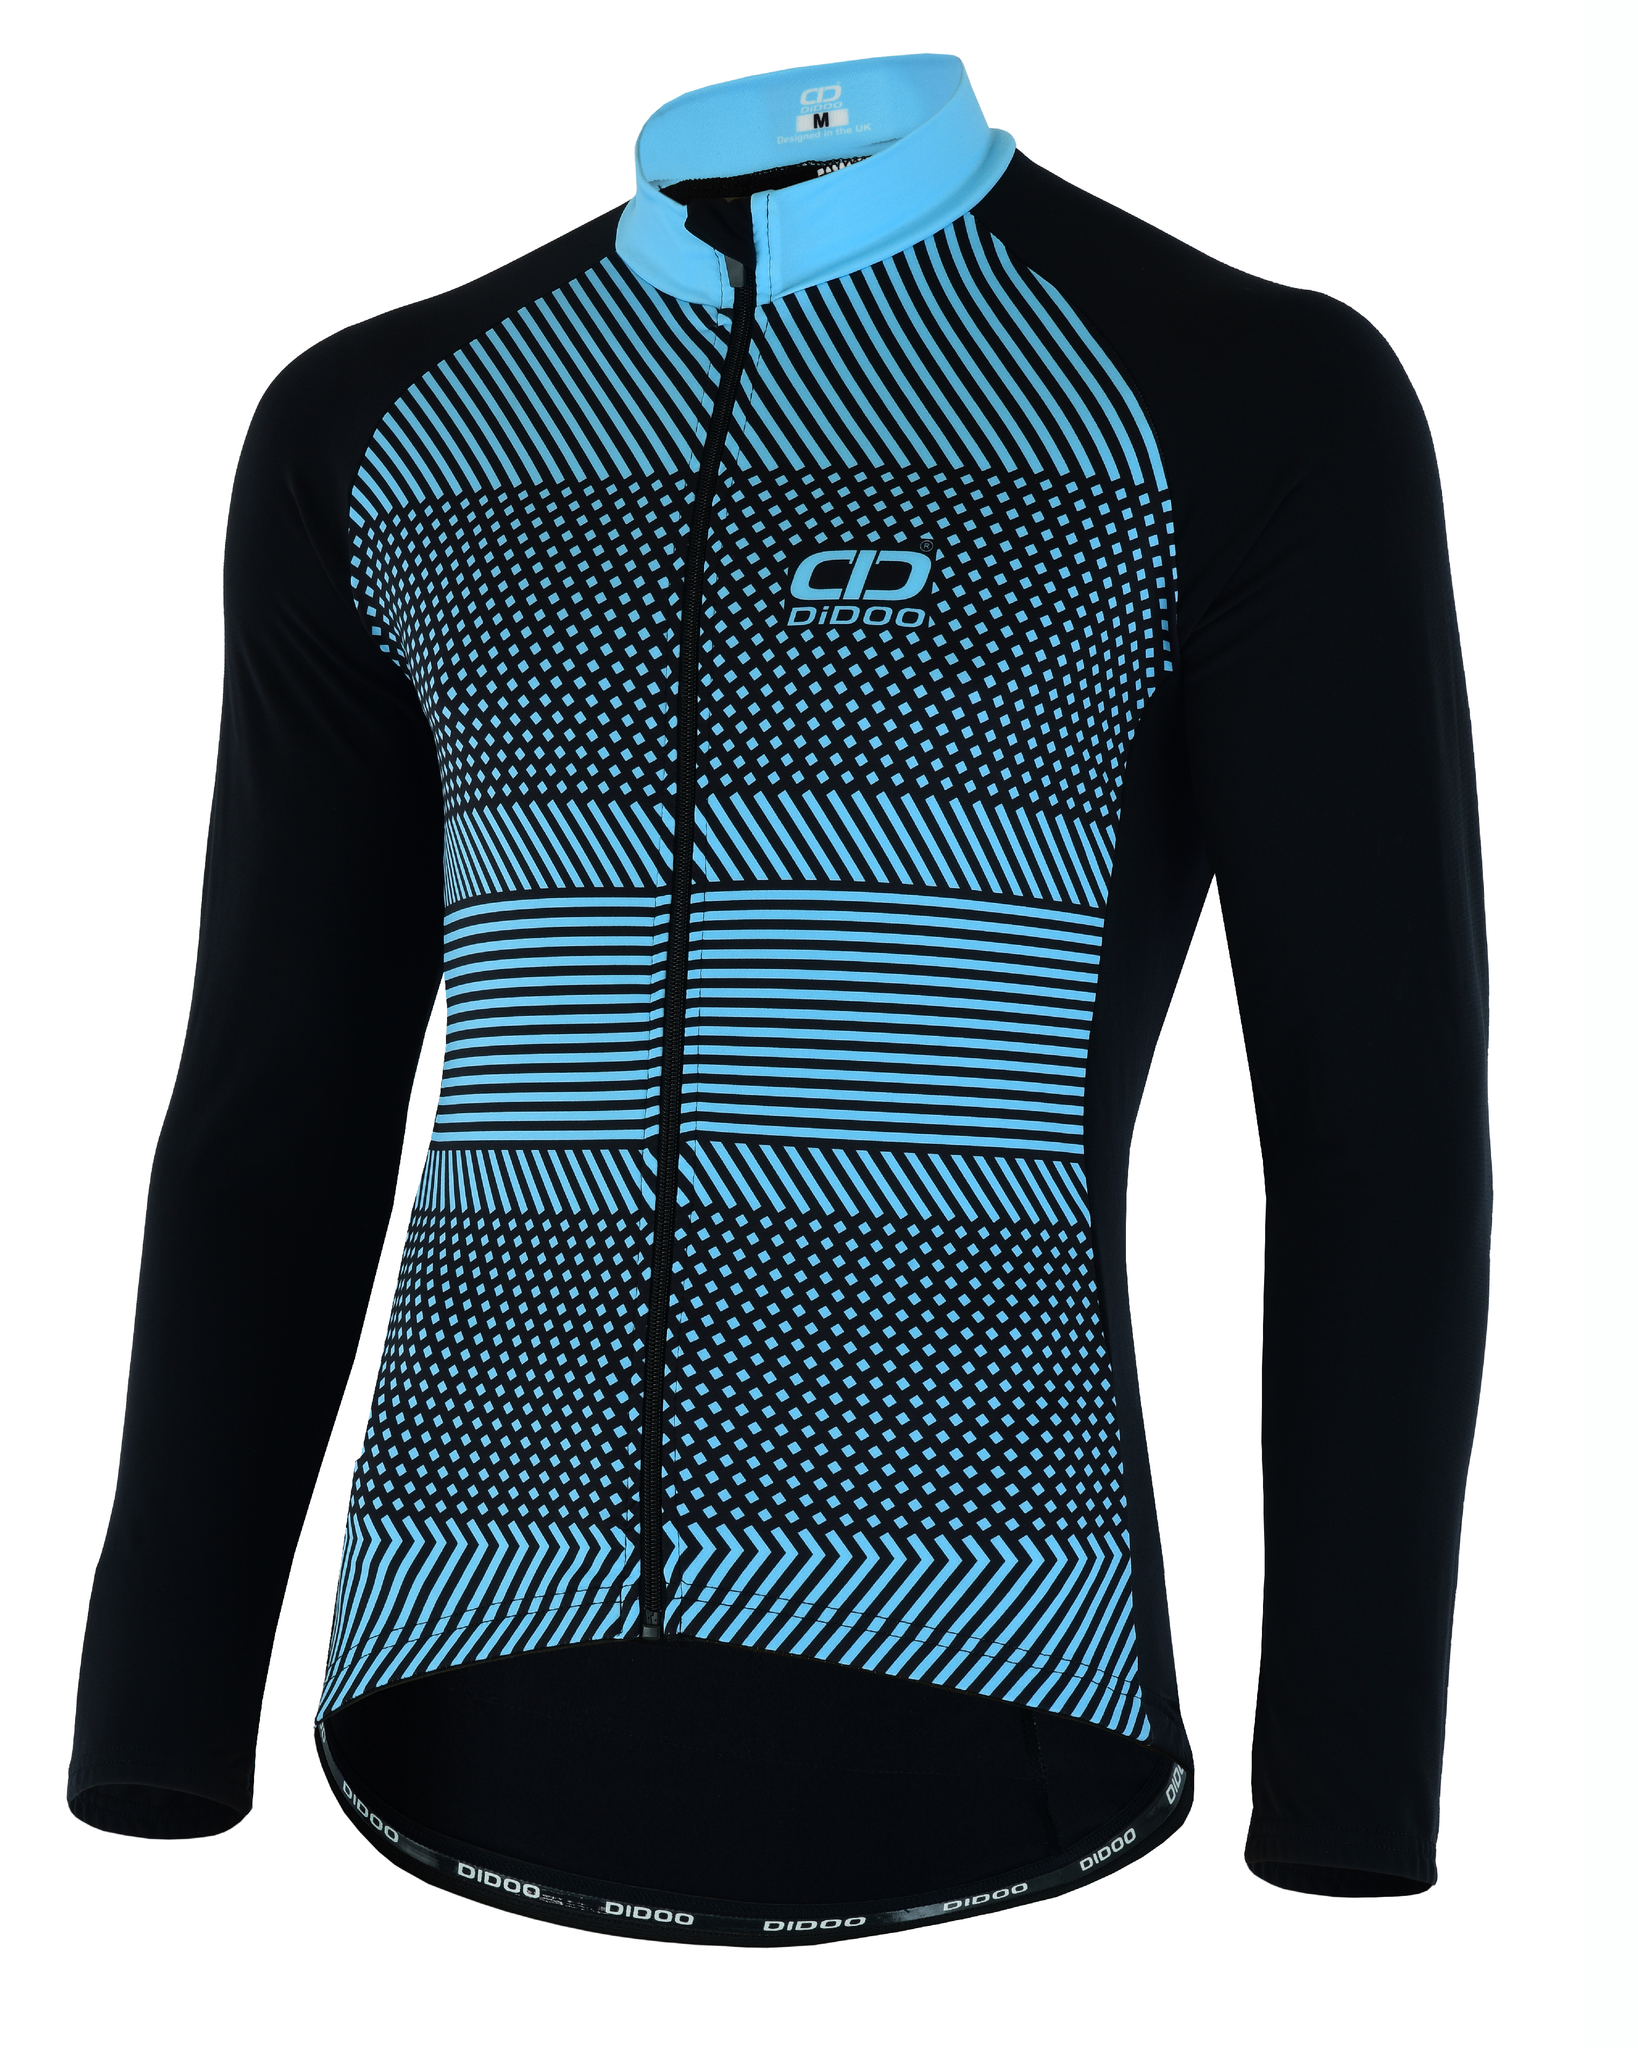 DiDOO Men’s Pro long sleeve winter cycling jersey Black and Blue